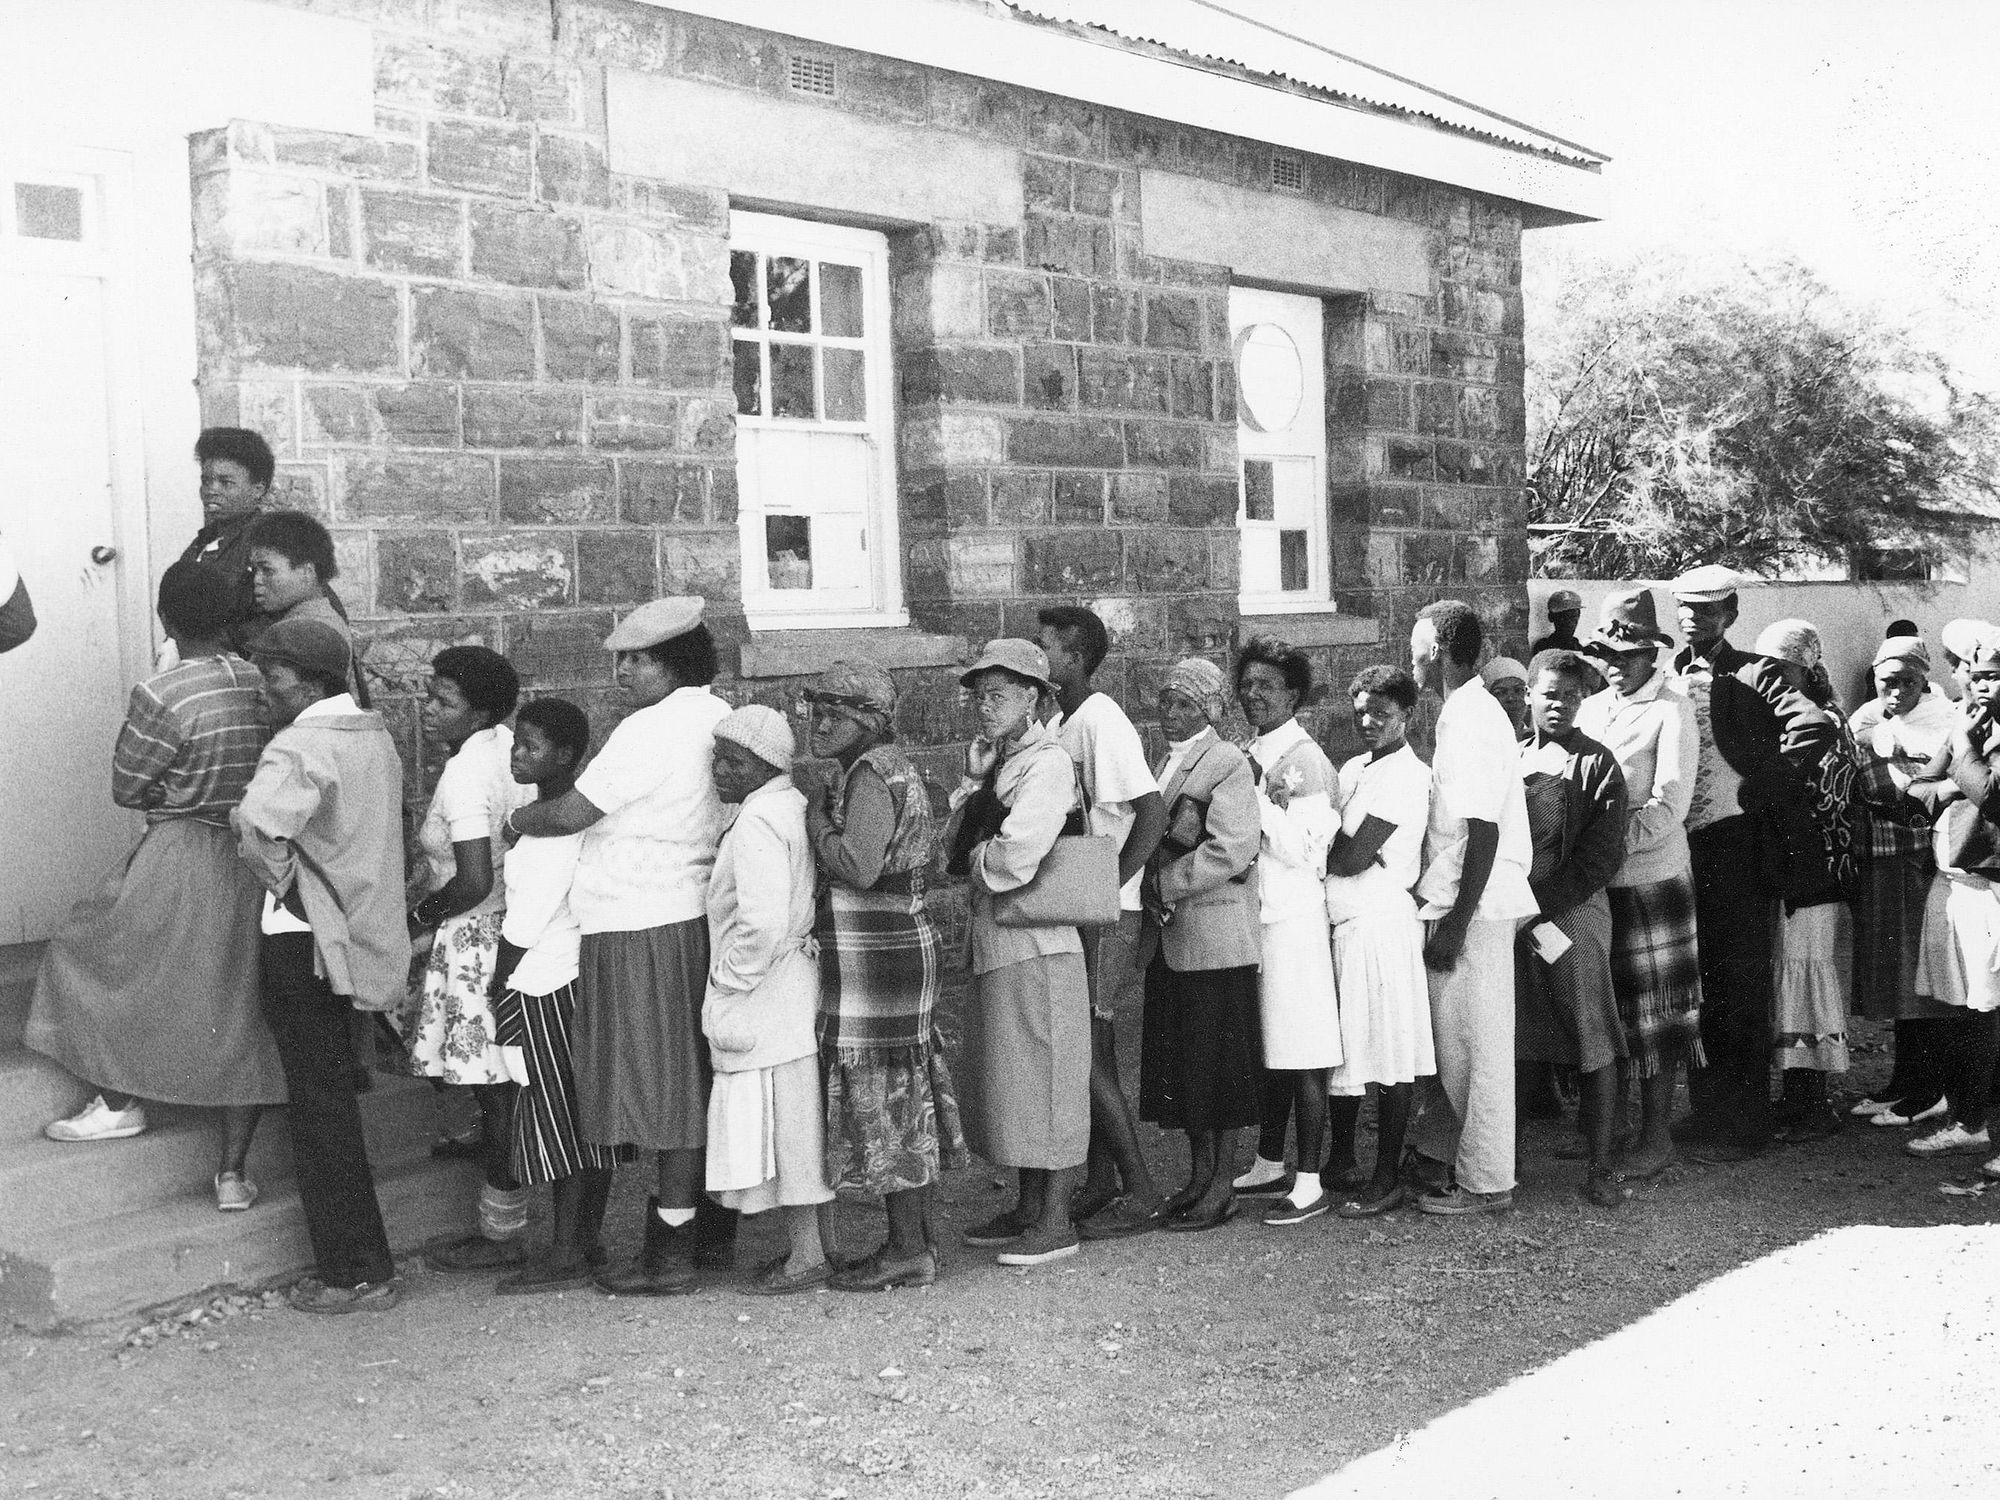 South Africans voters standing in long, winding queues to vote for the first time in the 1994 elections.